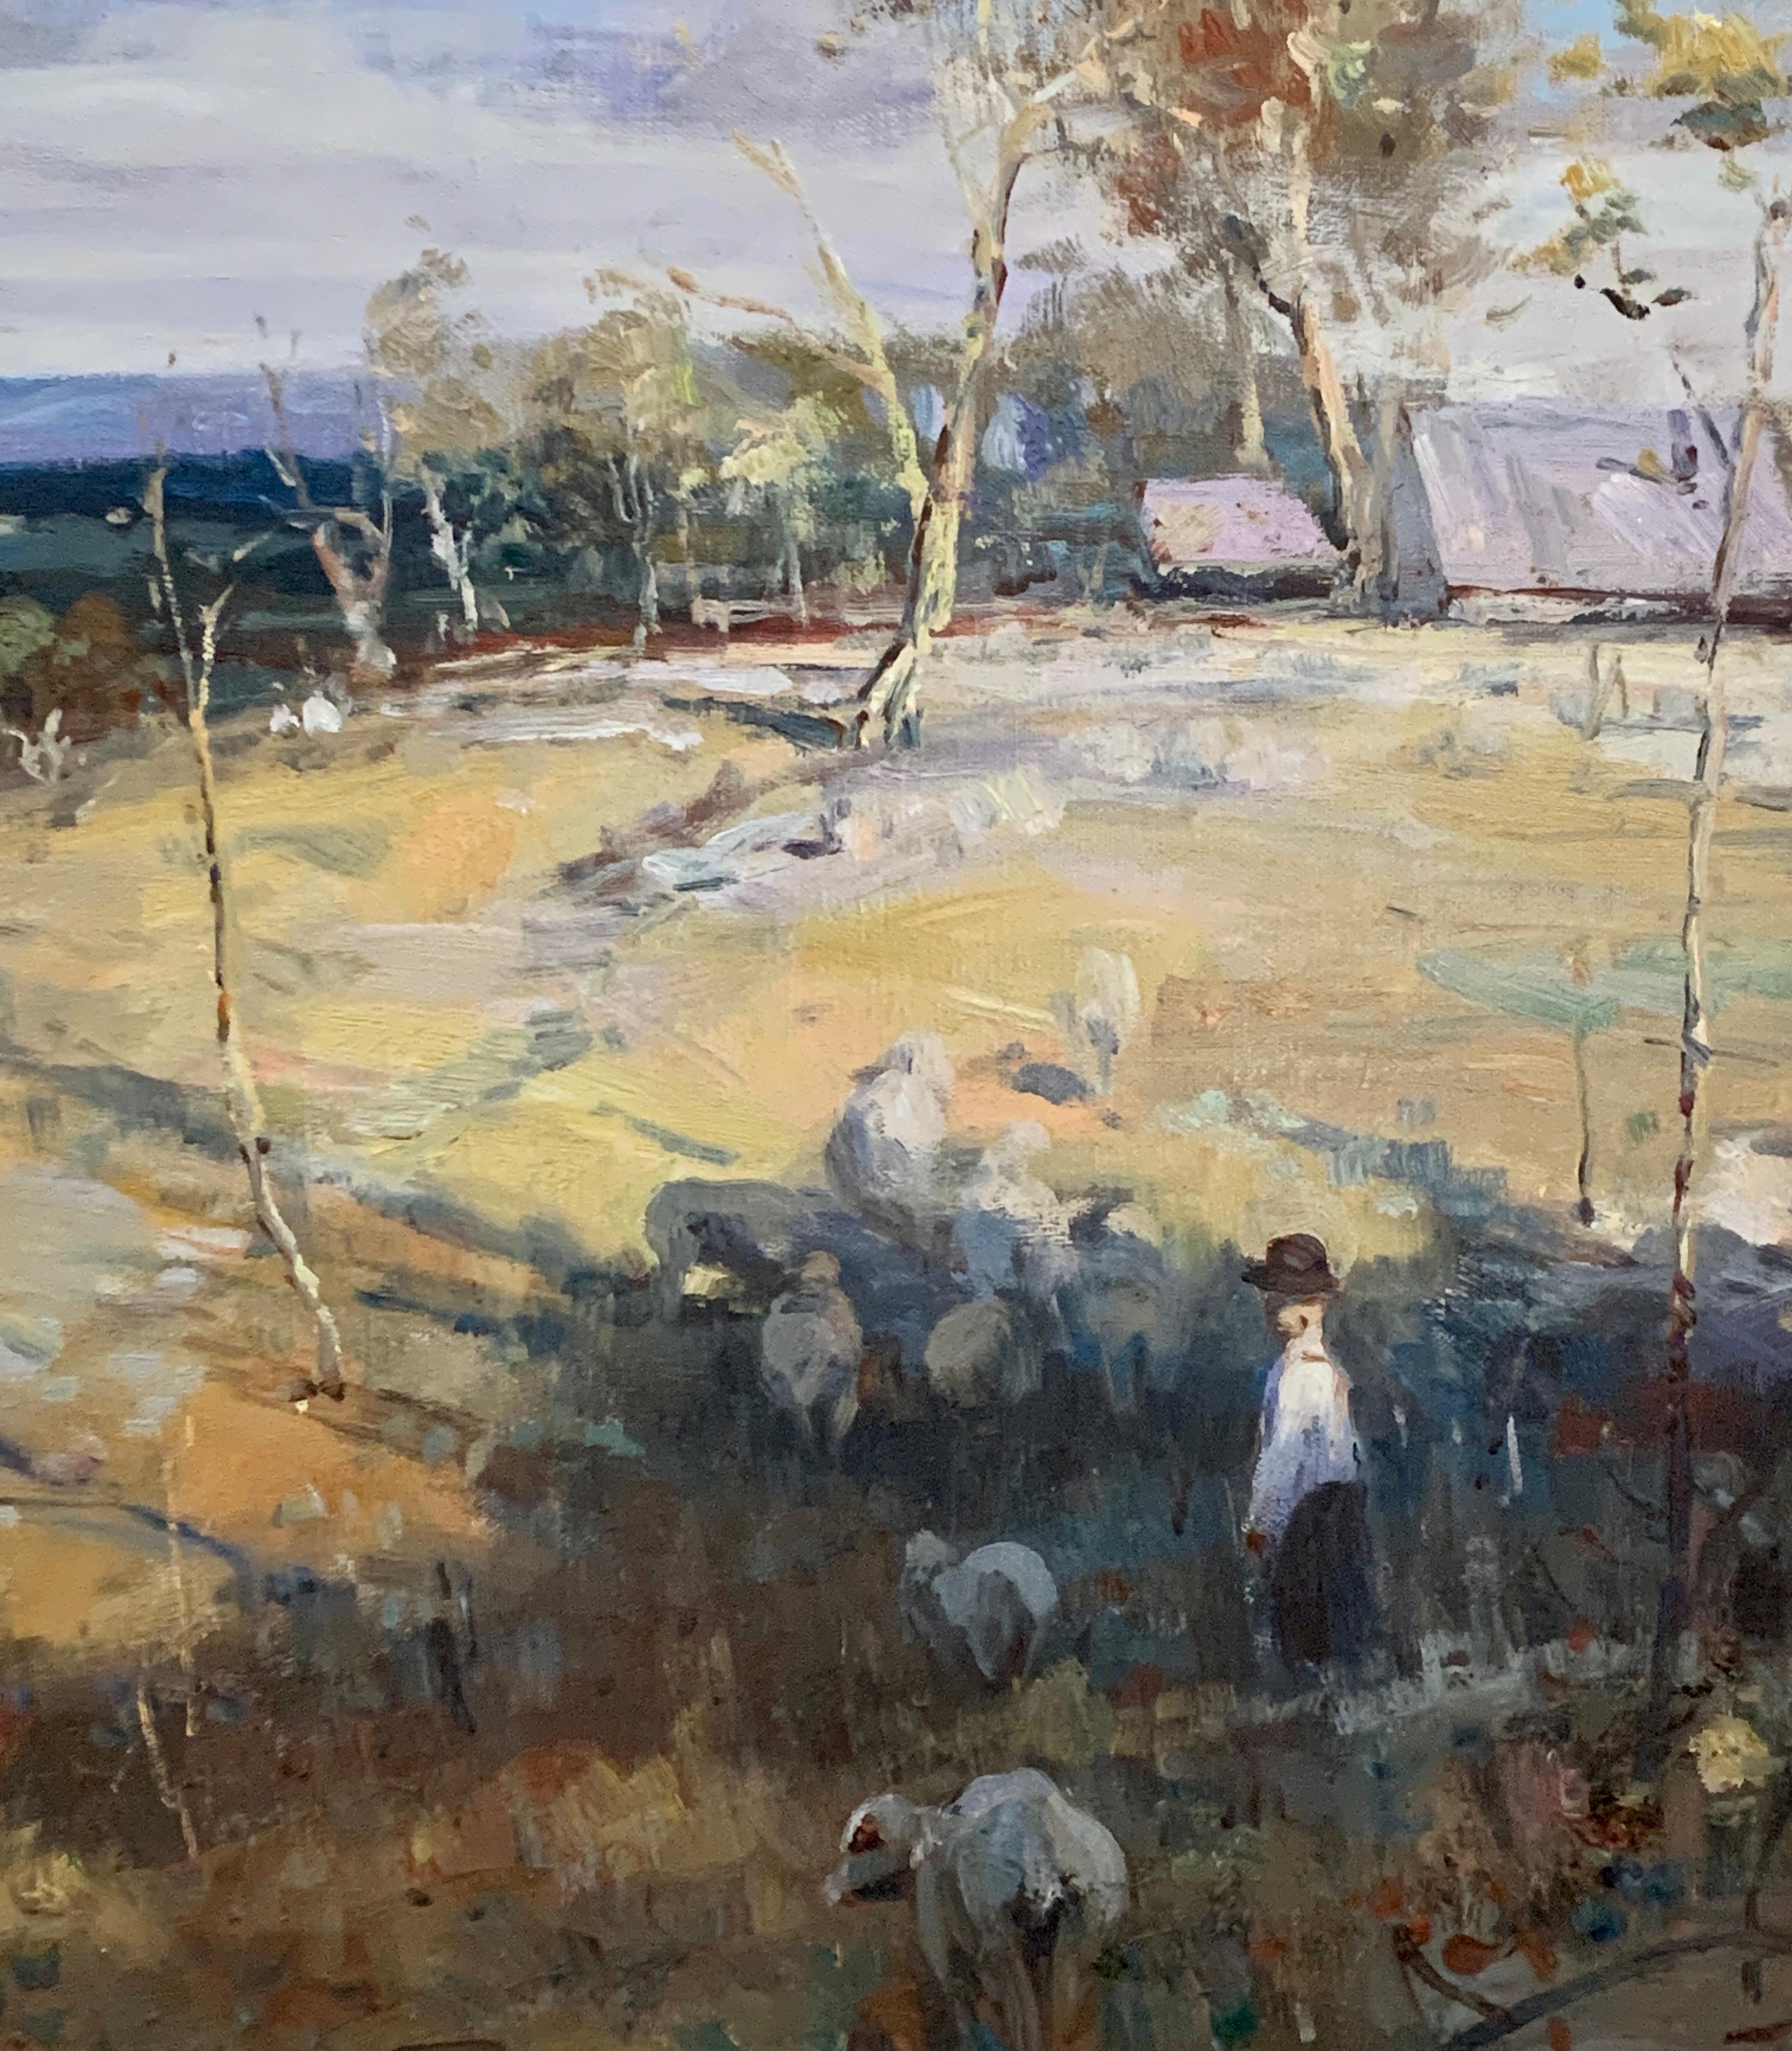 American late 20th century Impressionist landscape with figure, cottage, Sheep. - Painting by Everet